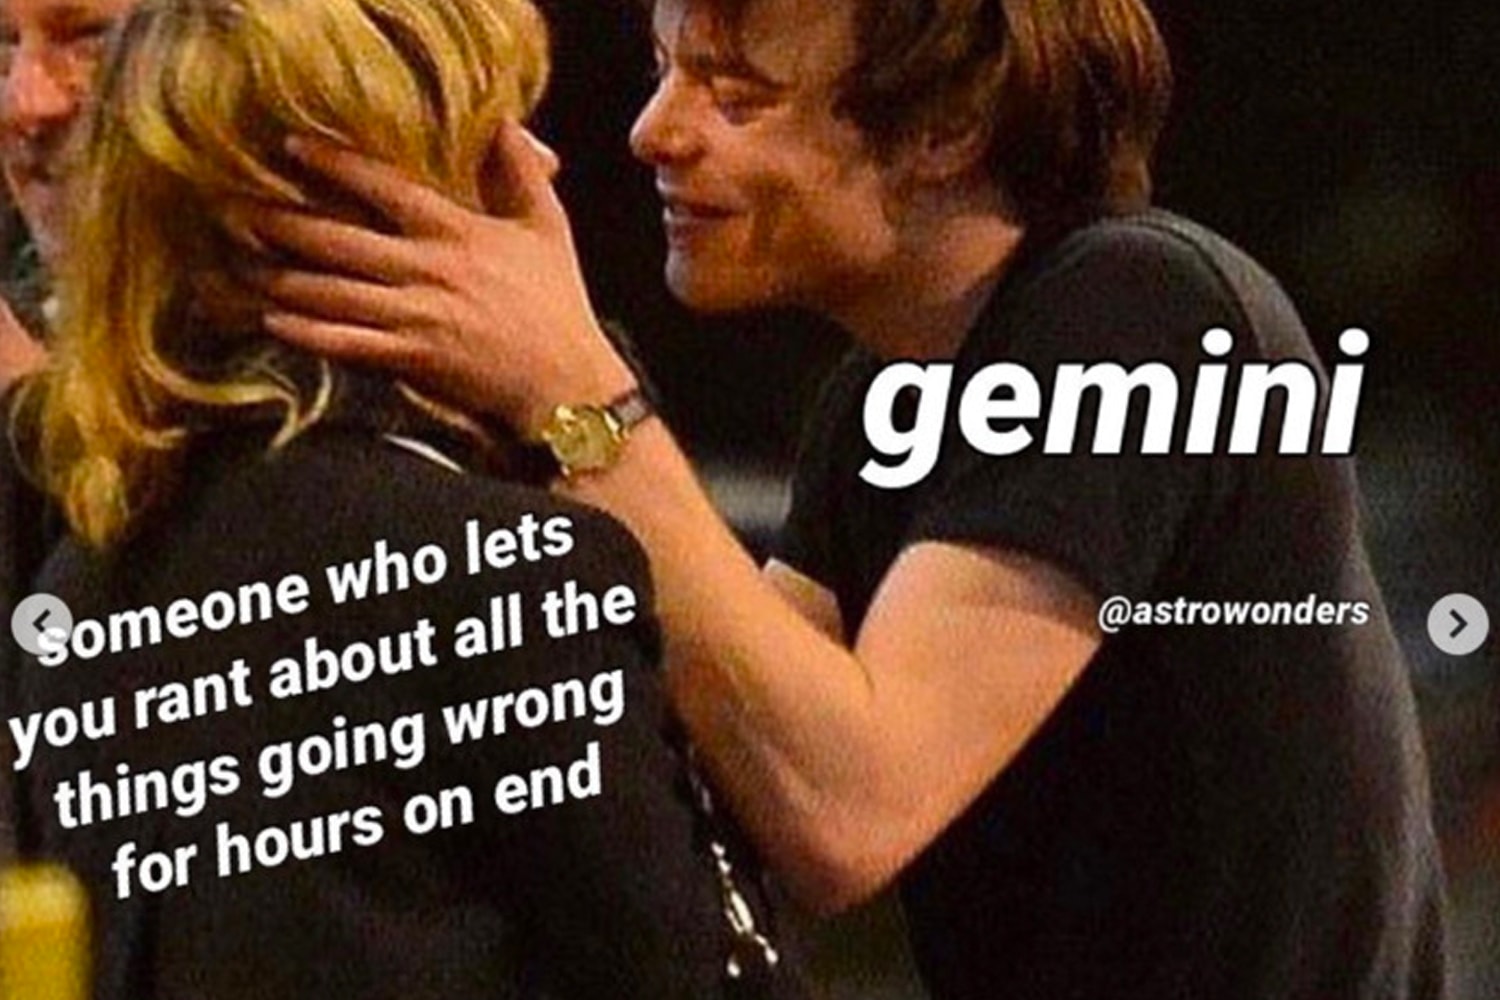 About gemini things a Gemini Constellation